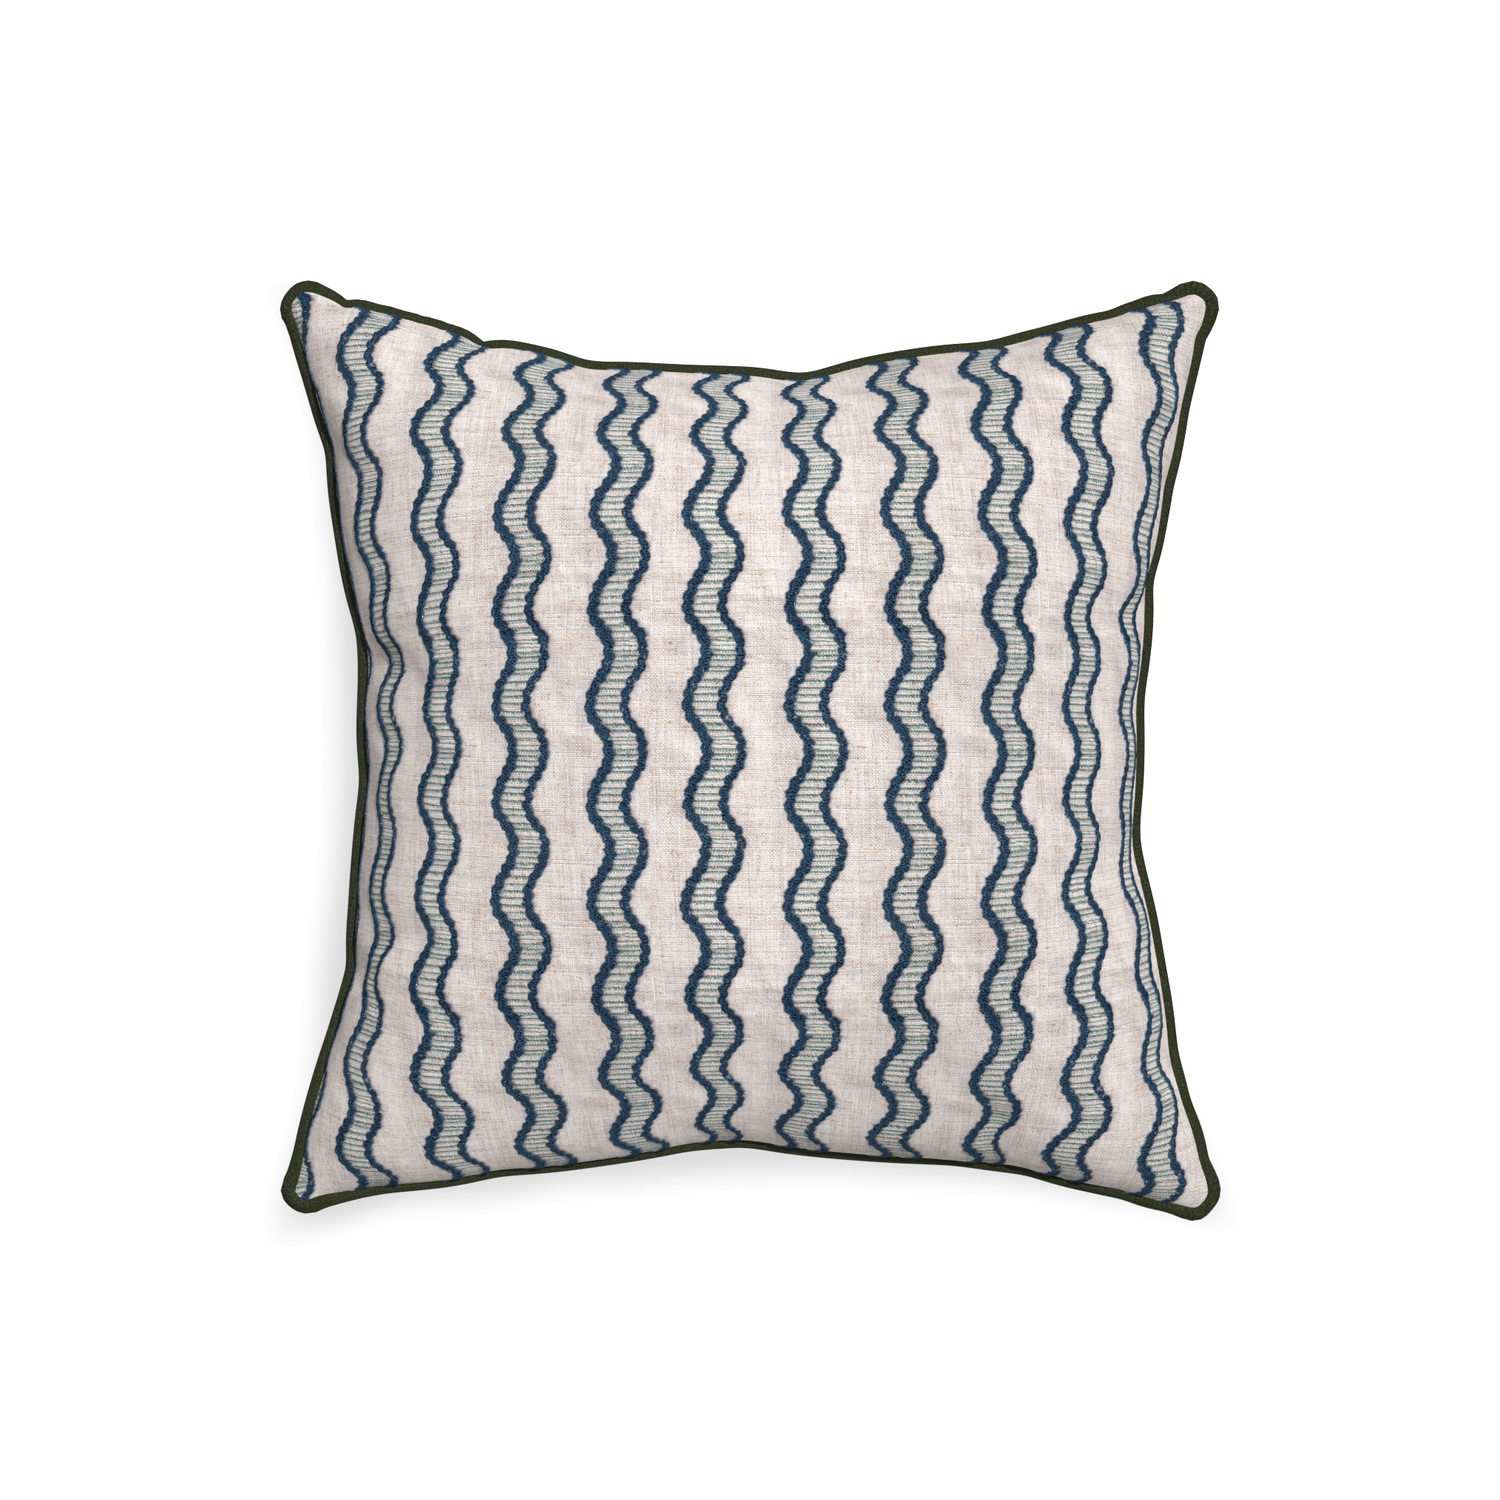 20-square beatrice custom embroidered wavepillow with f piping on white background